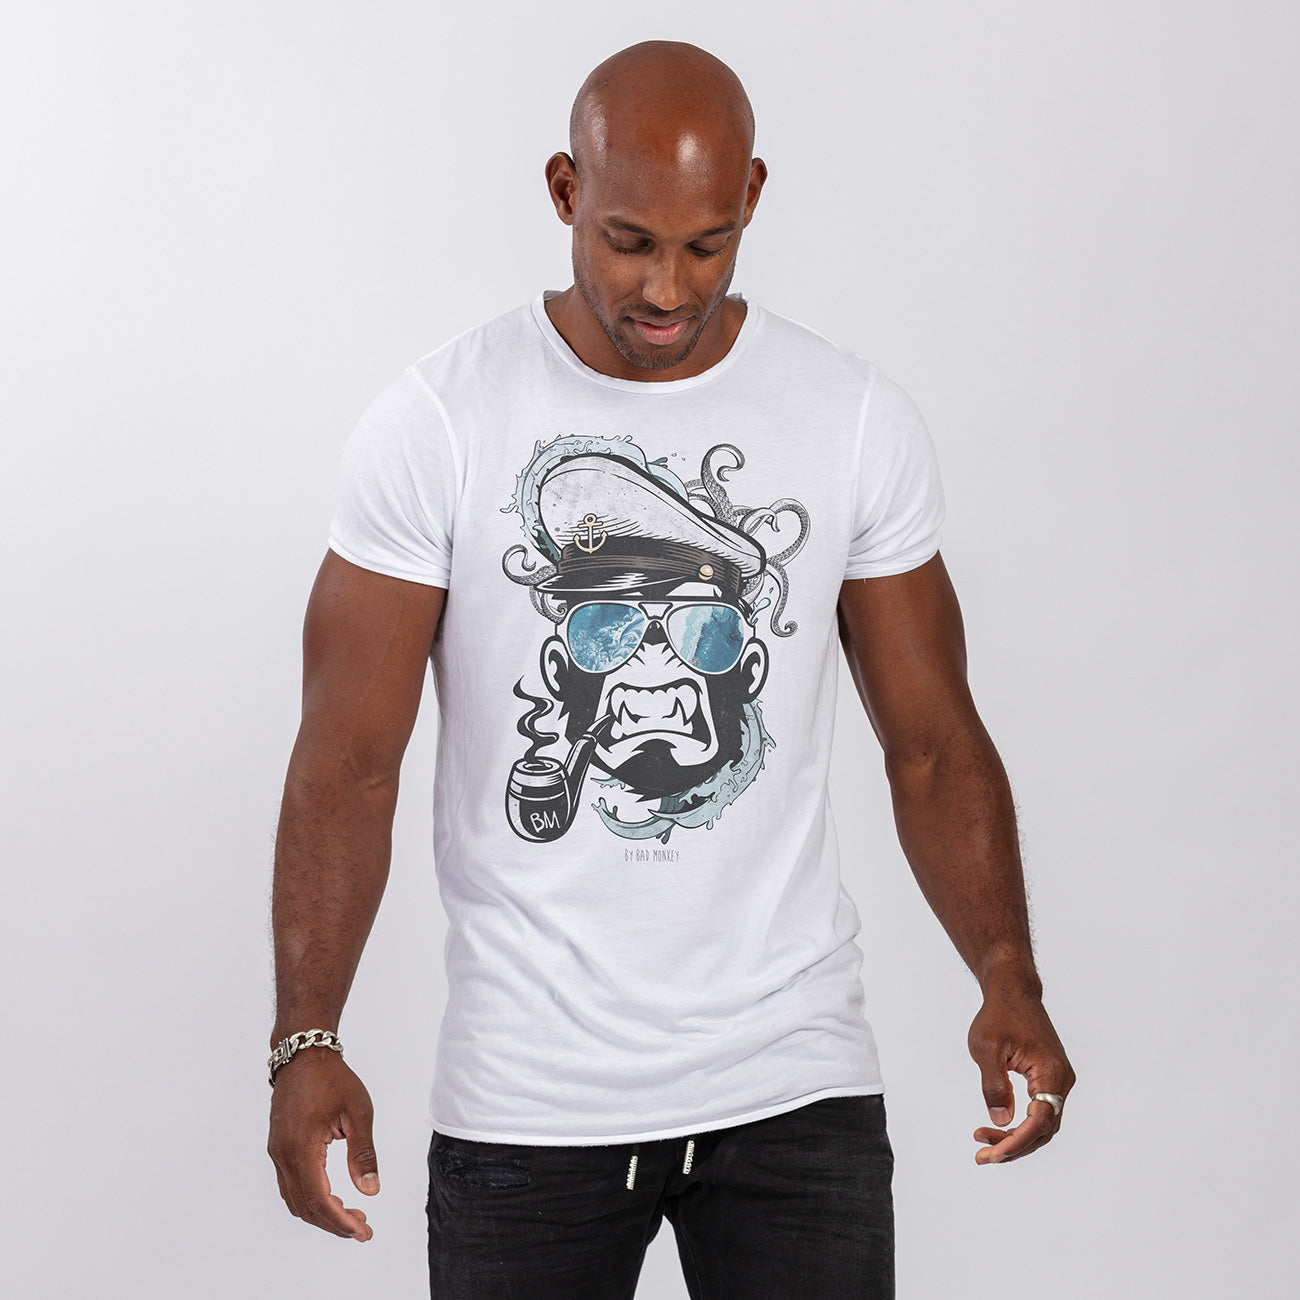 Sailor Monkey White Tshirt | Available only in S